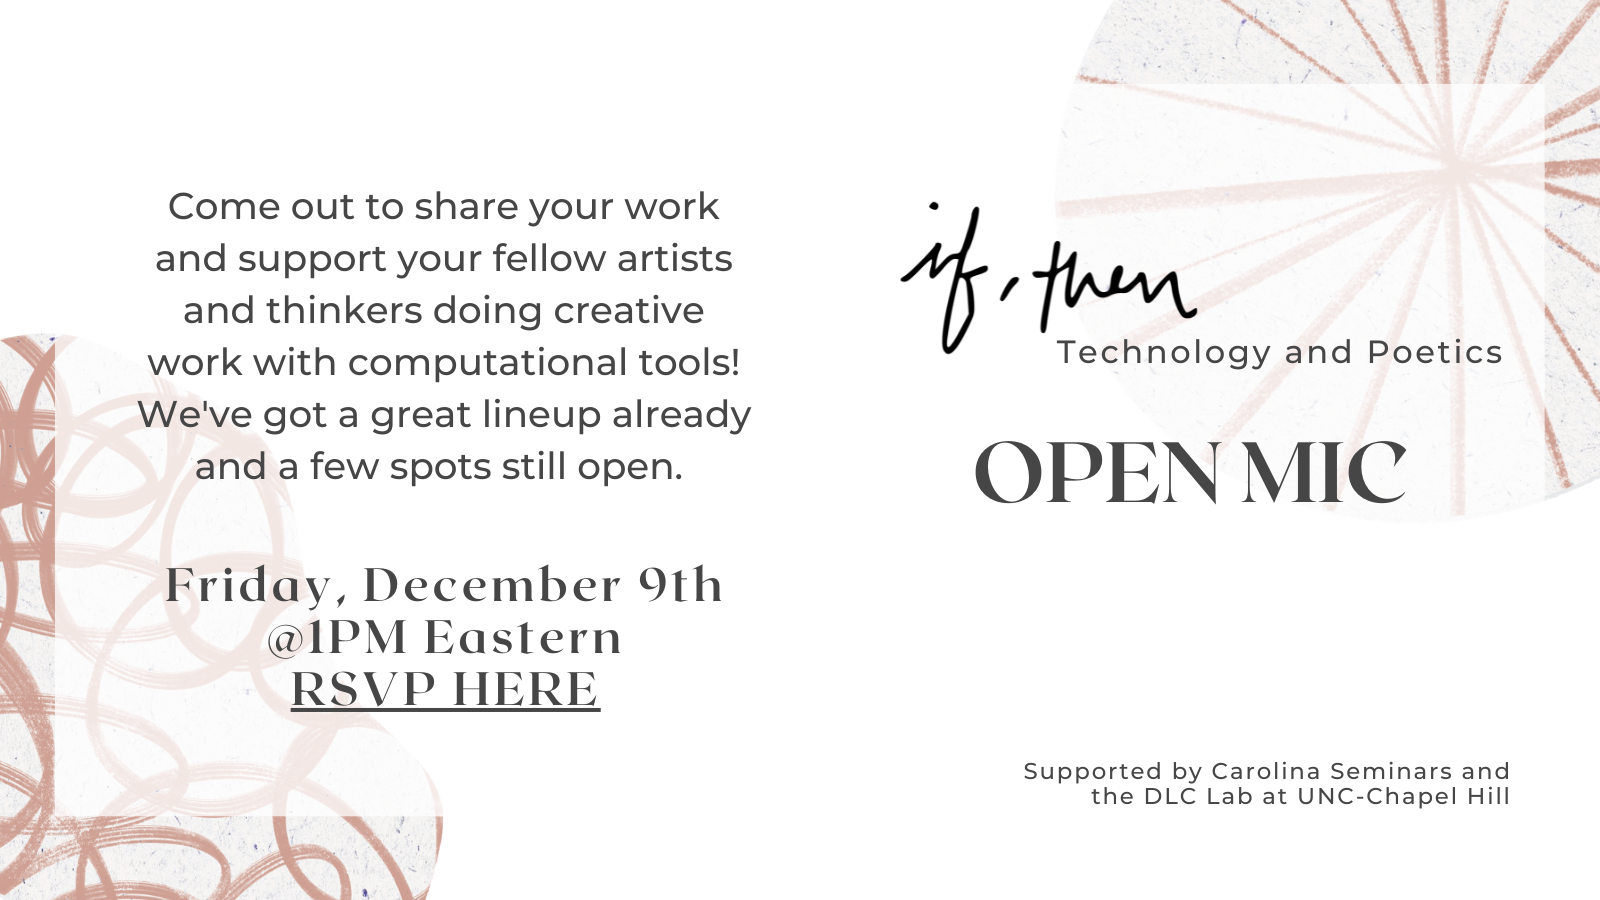 Come out to share your work and support your fellow artists and thinkers doing creative work with computational tools. We've got a great lineup already and a few spots still open. If, Then: Technology and Poetics. Open Mic Friday, December 9th @1 pm Eastern. Supported by Carolina Seminars and the DLC Lab at UNC-Chapel Hill.